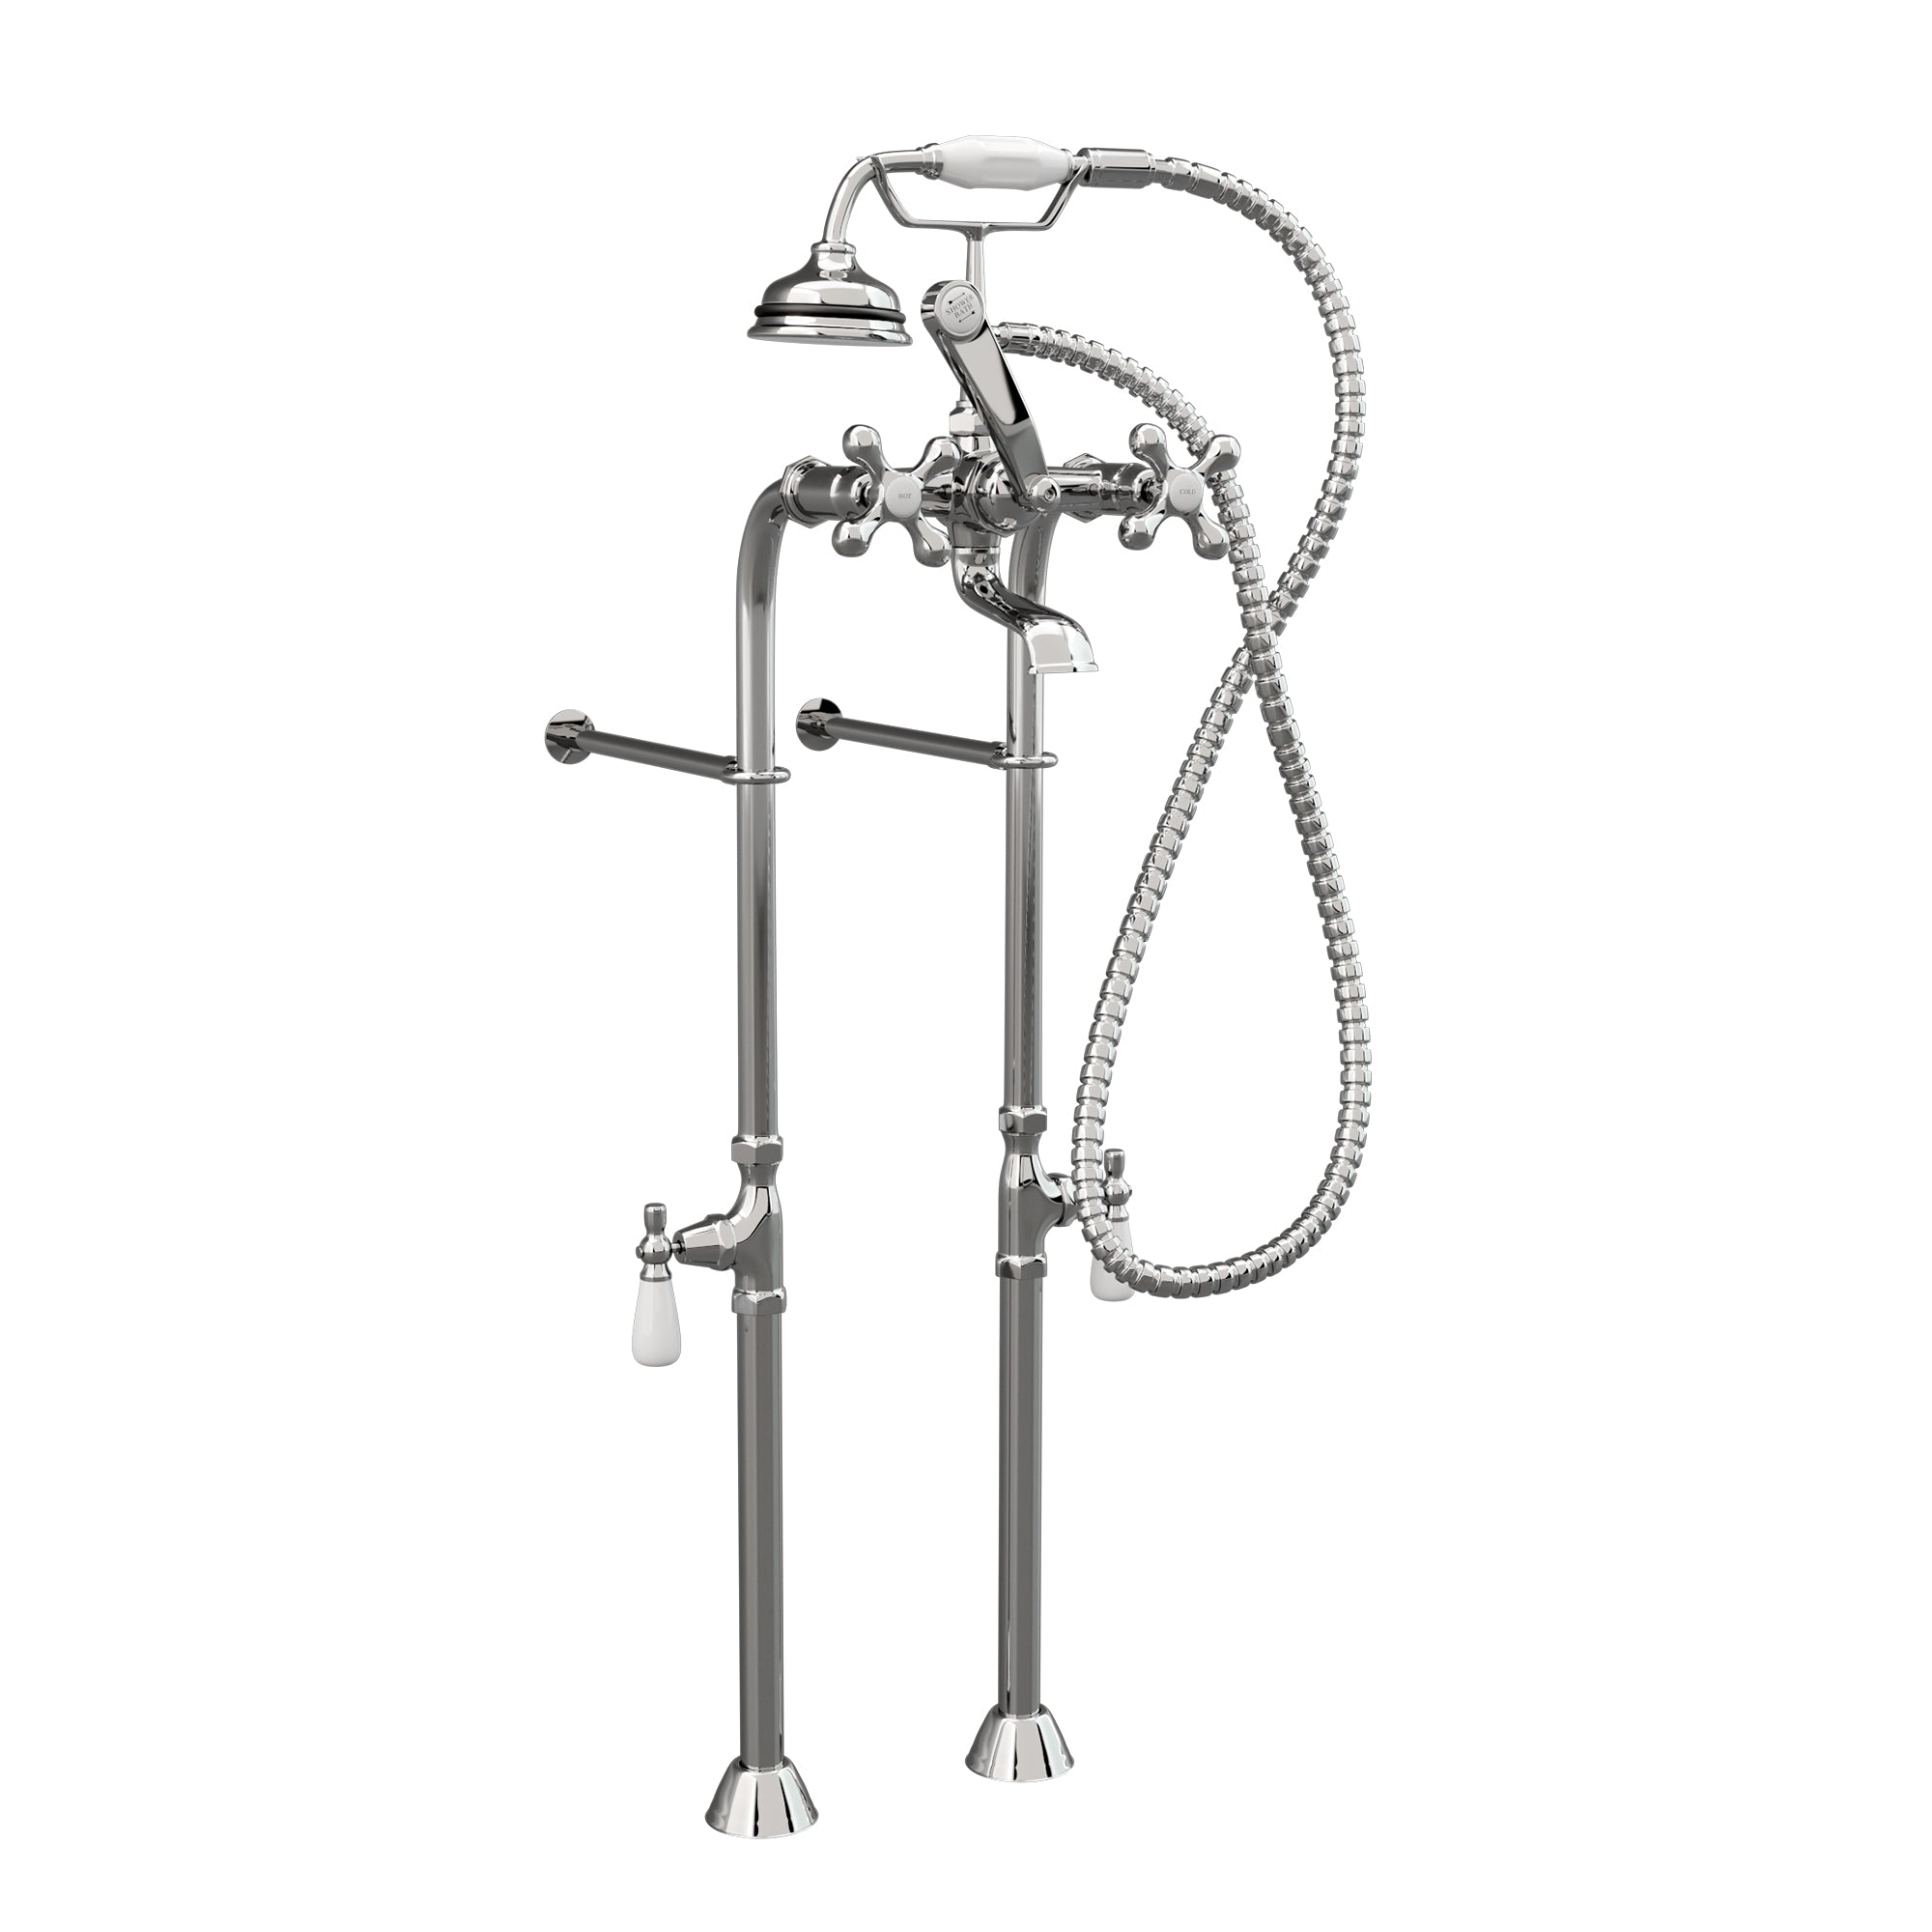 Cambridge Plumbing Clawfoot Tub Freestanding British Telephone Faucet & Hand Held Shower Combo Brushed Nickel CAM398463 - Vital Hydrotherapy